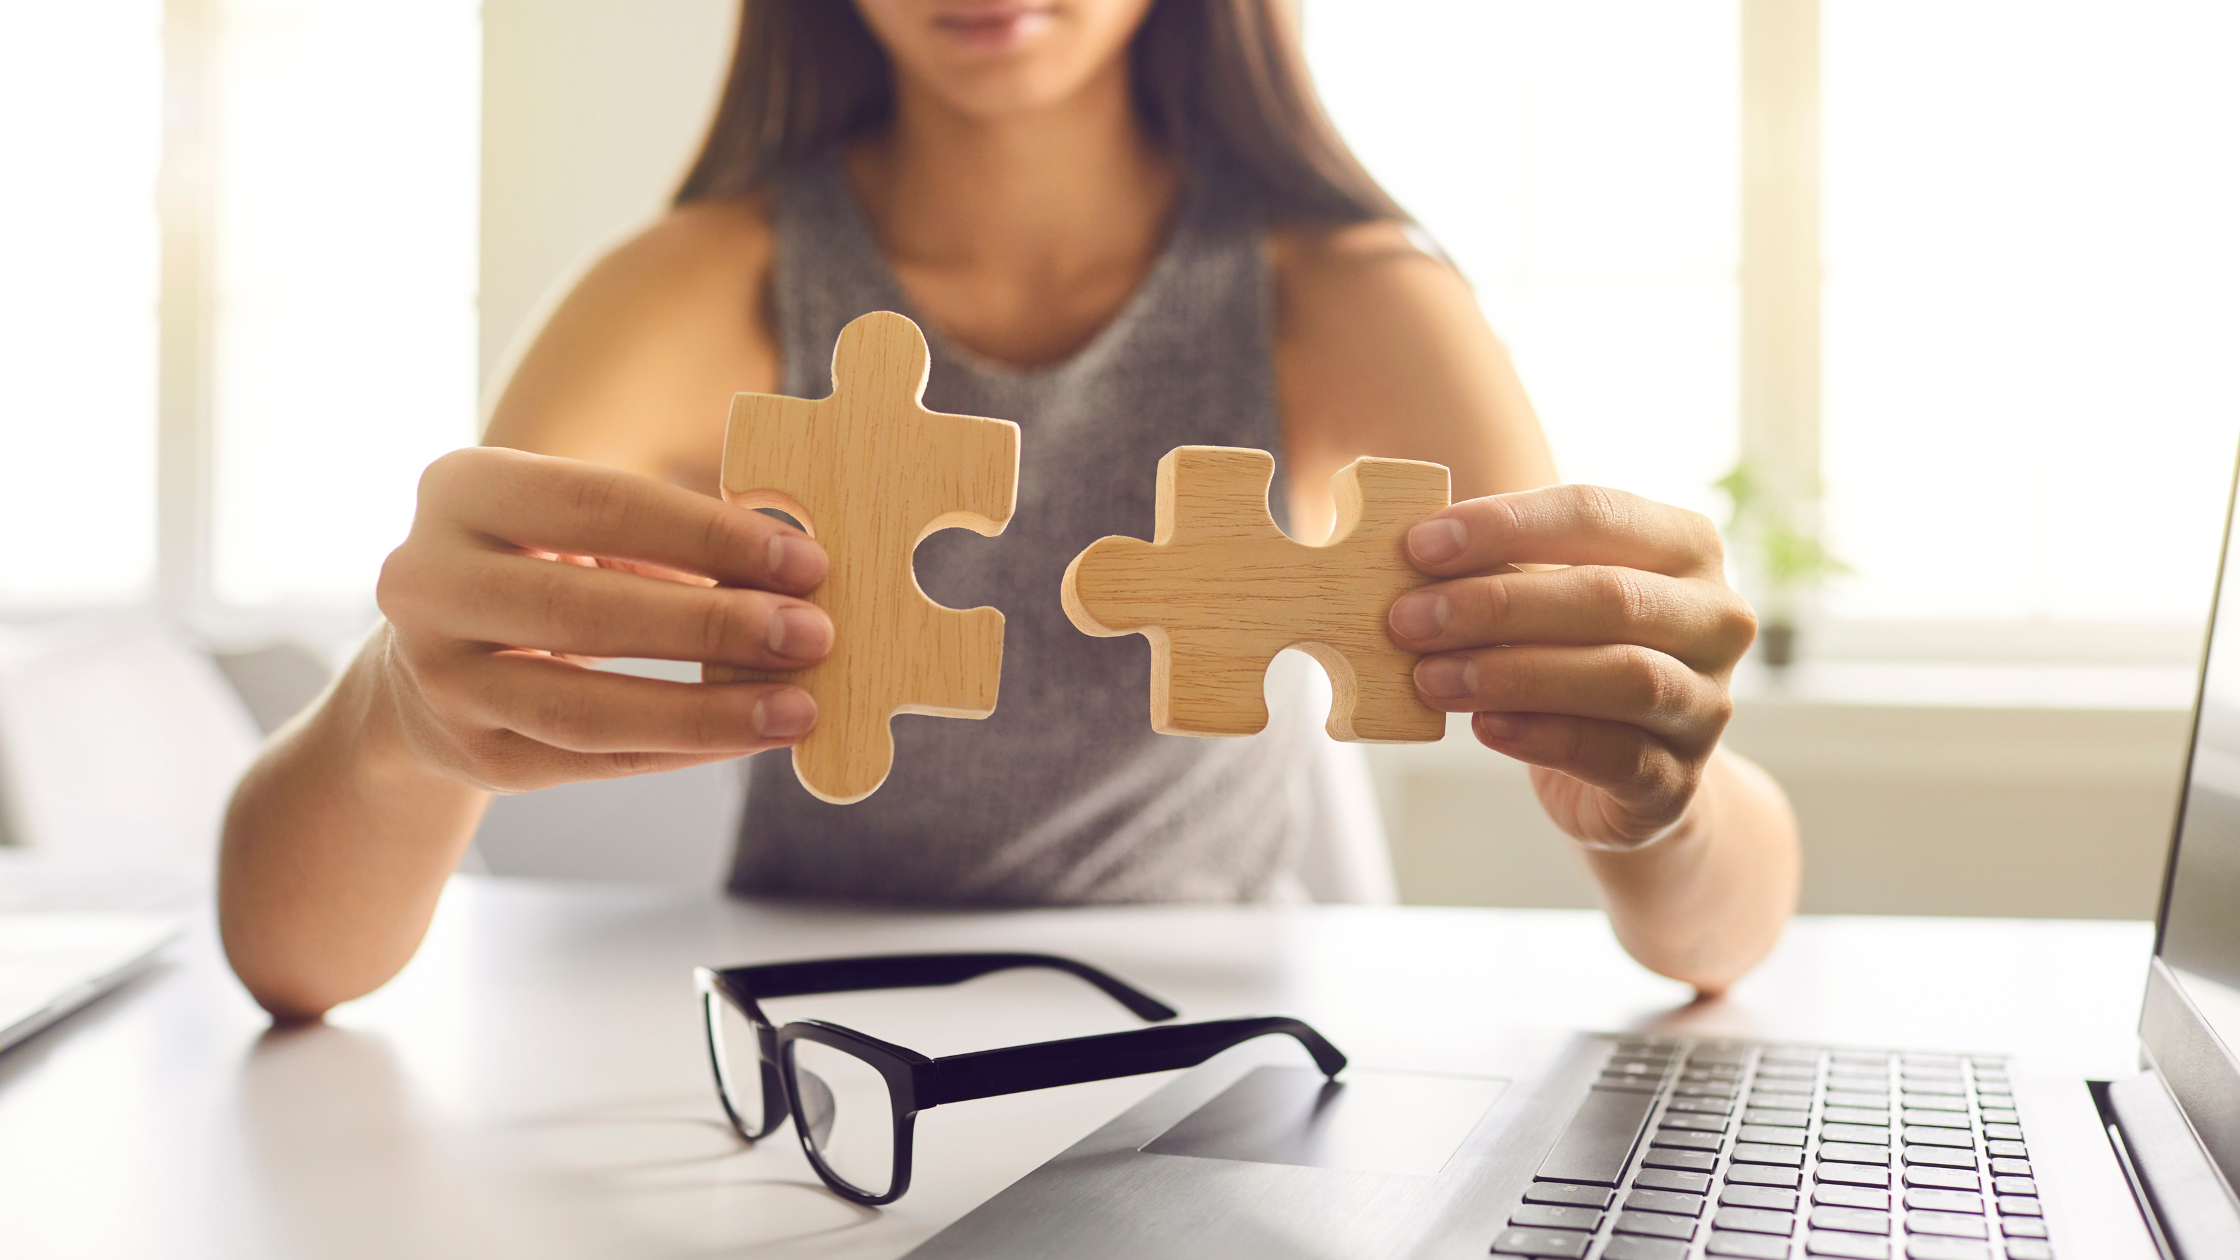 Woman holding two wooden puzzle pieces that will join together.